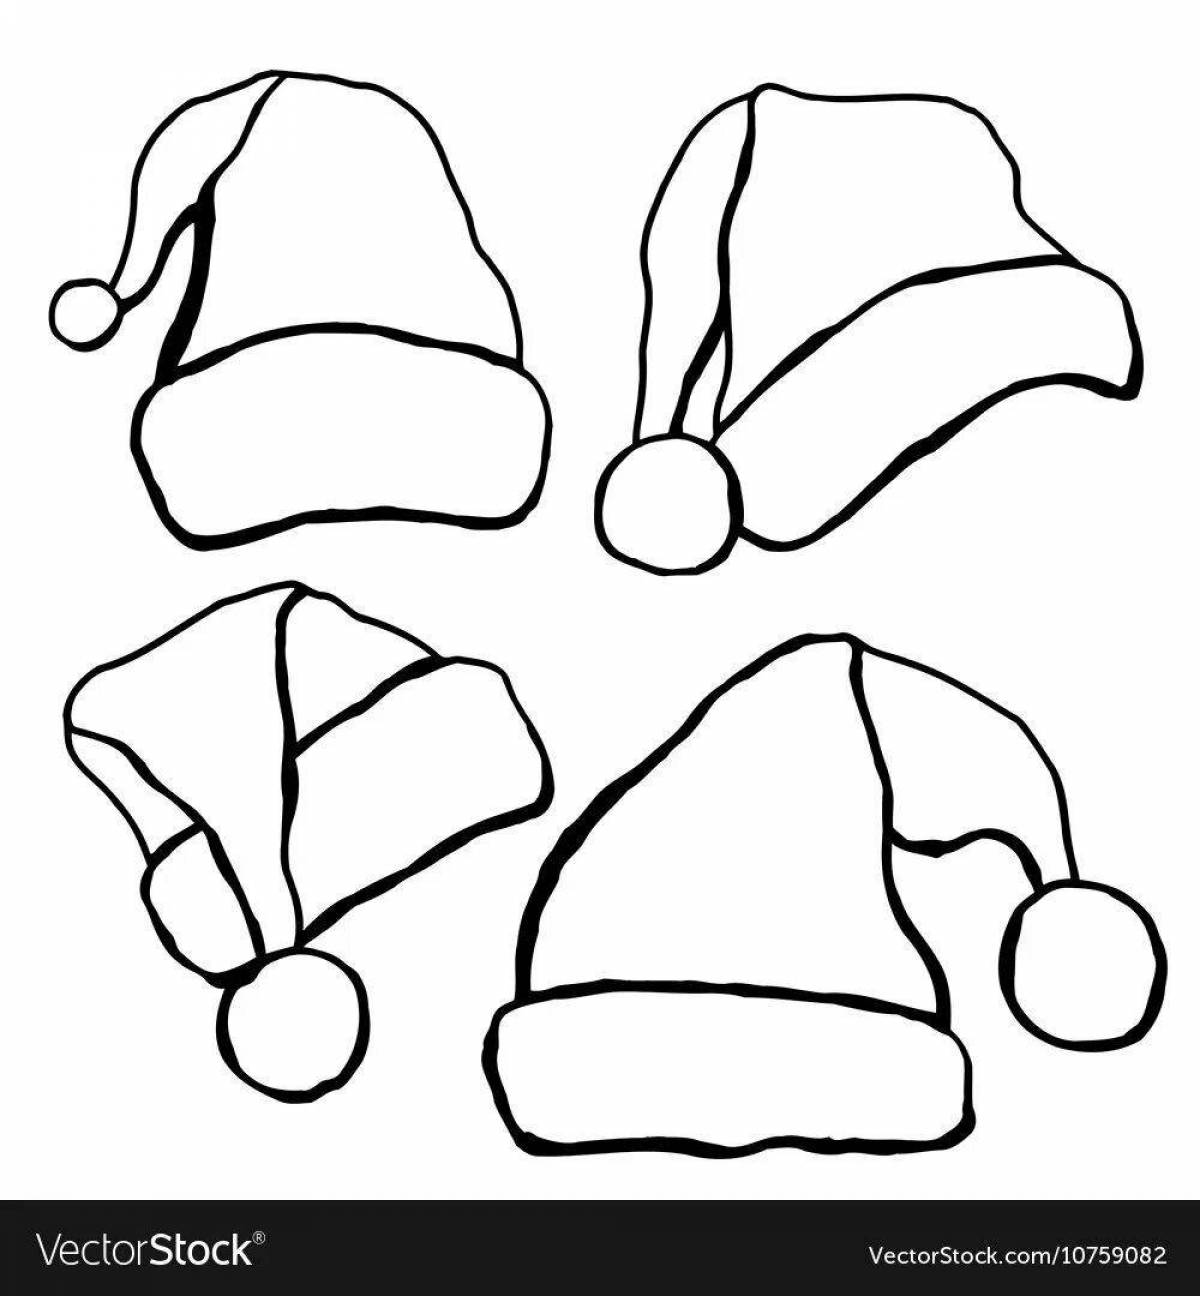 Santa's magic hat coloring page for kids